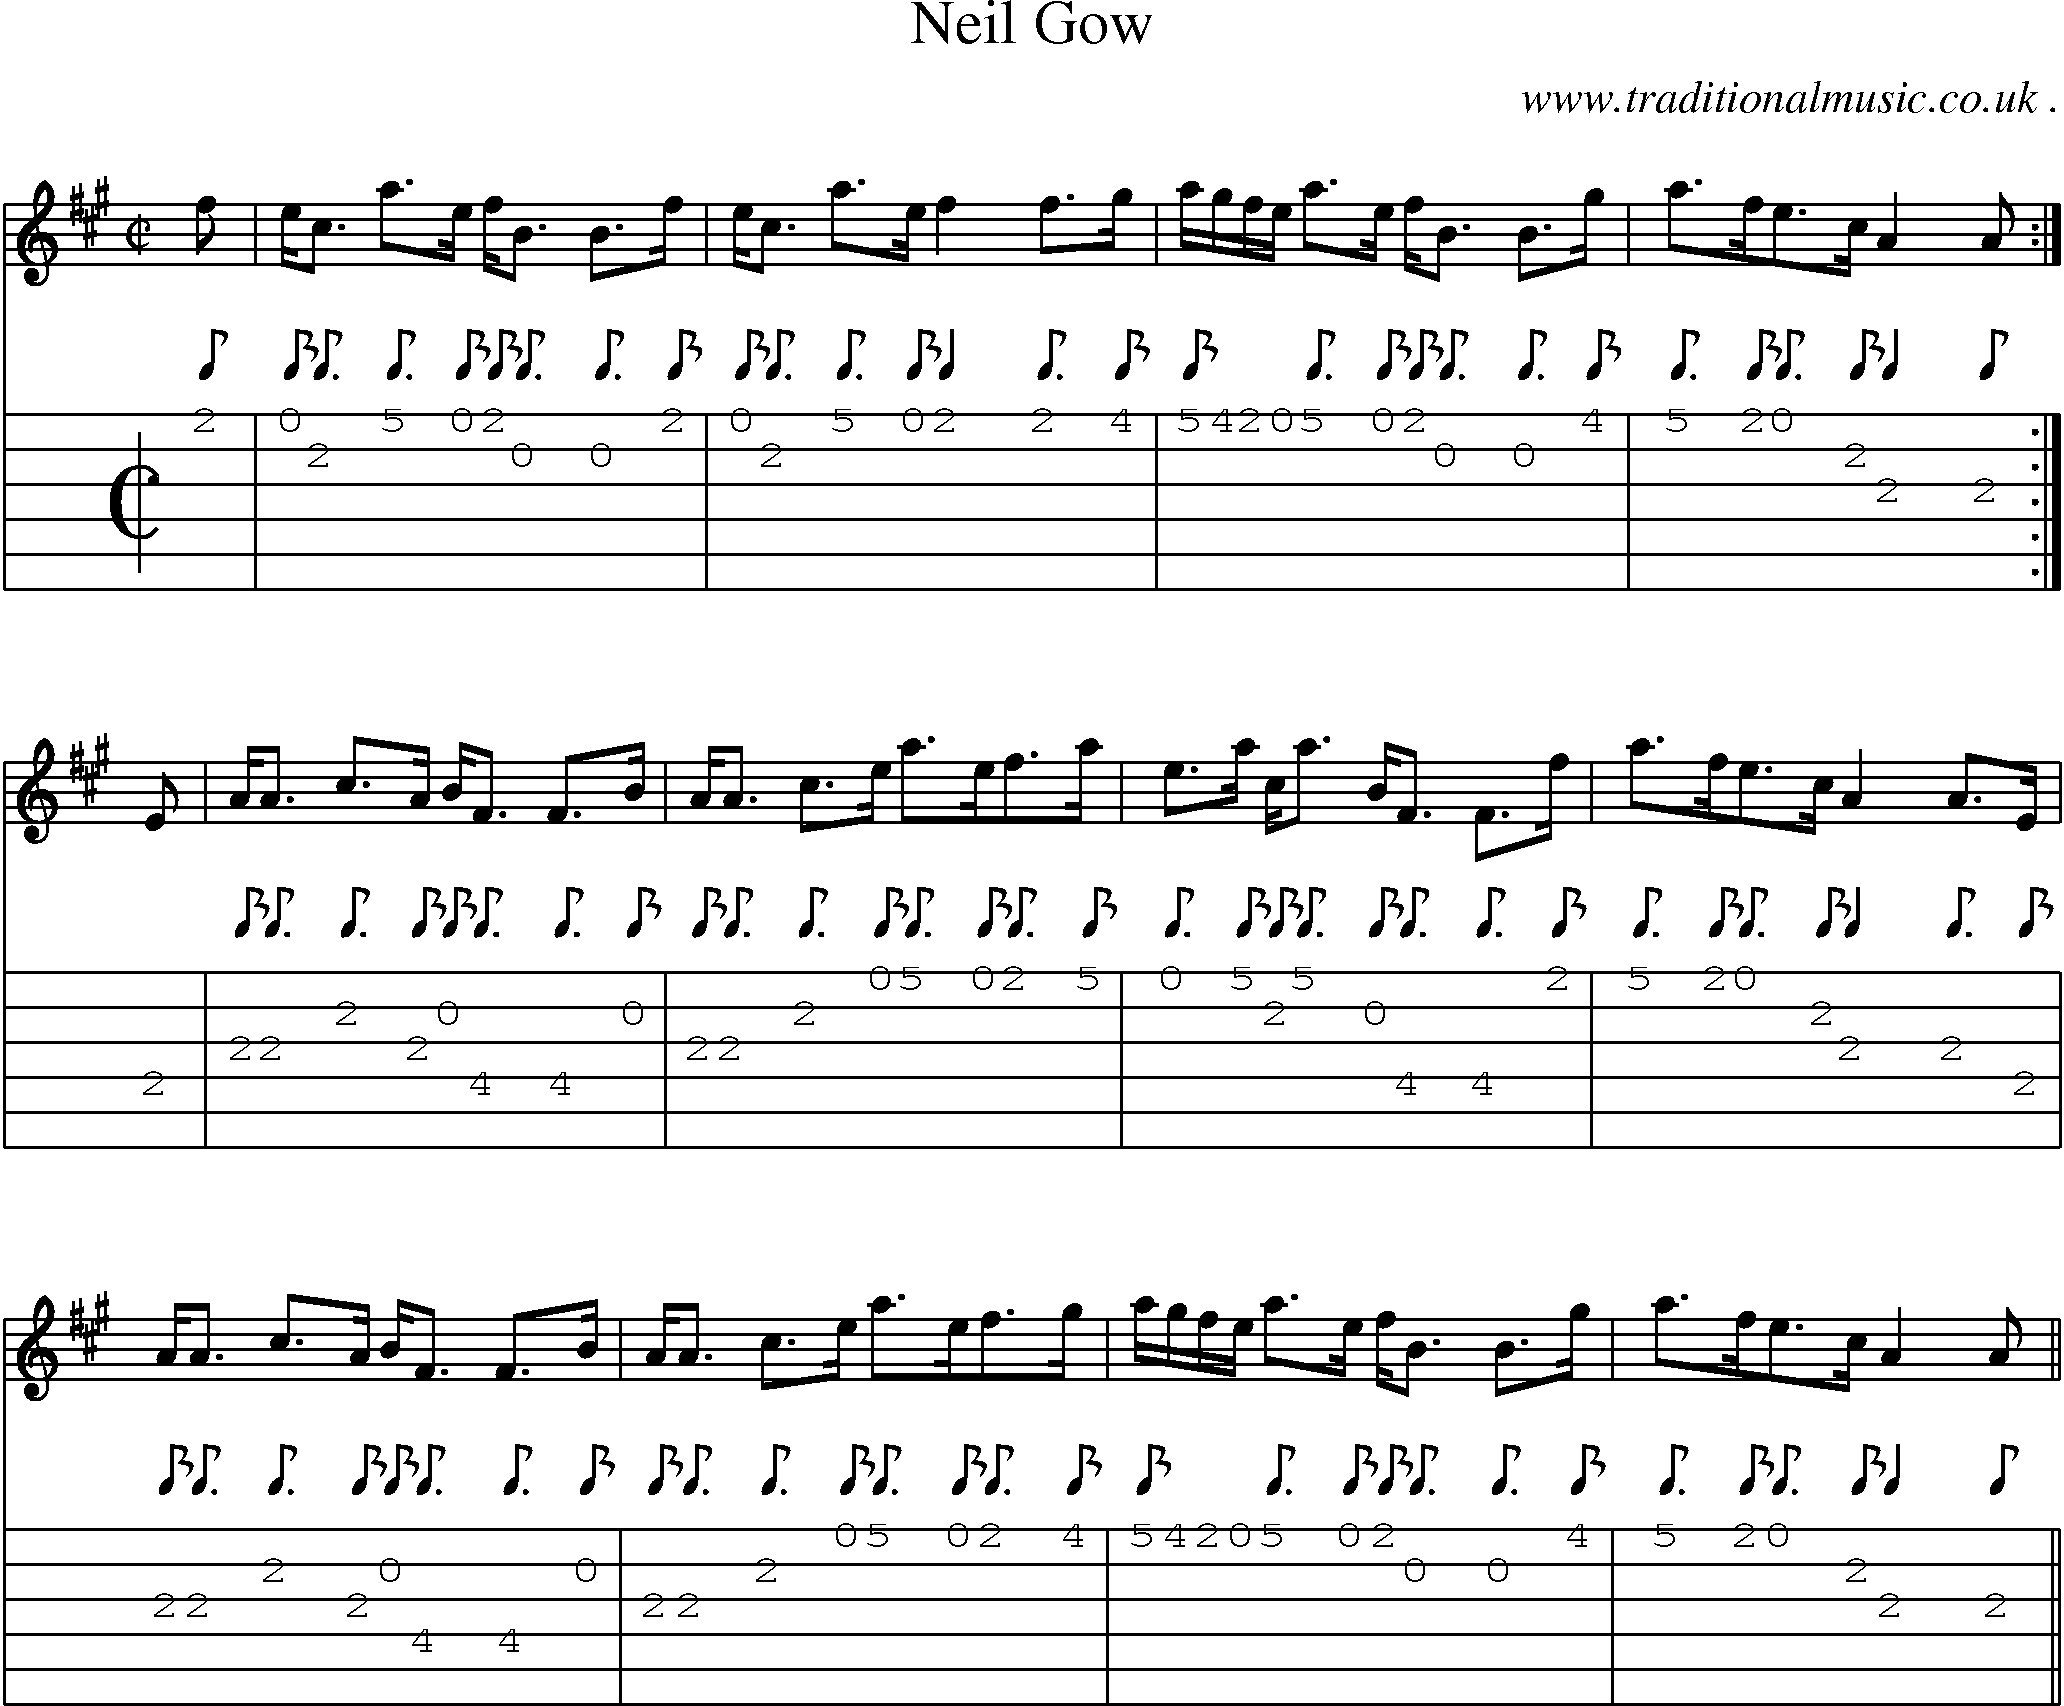 Sheet-music  score, Chords and Guitar Tabs for Neil Gow